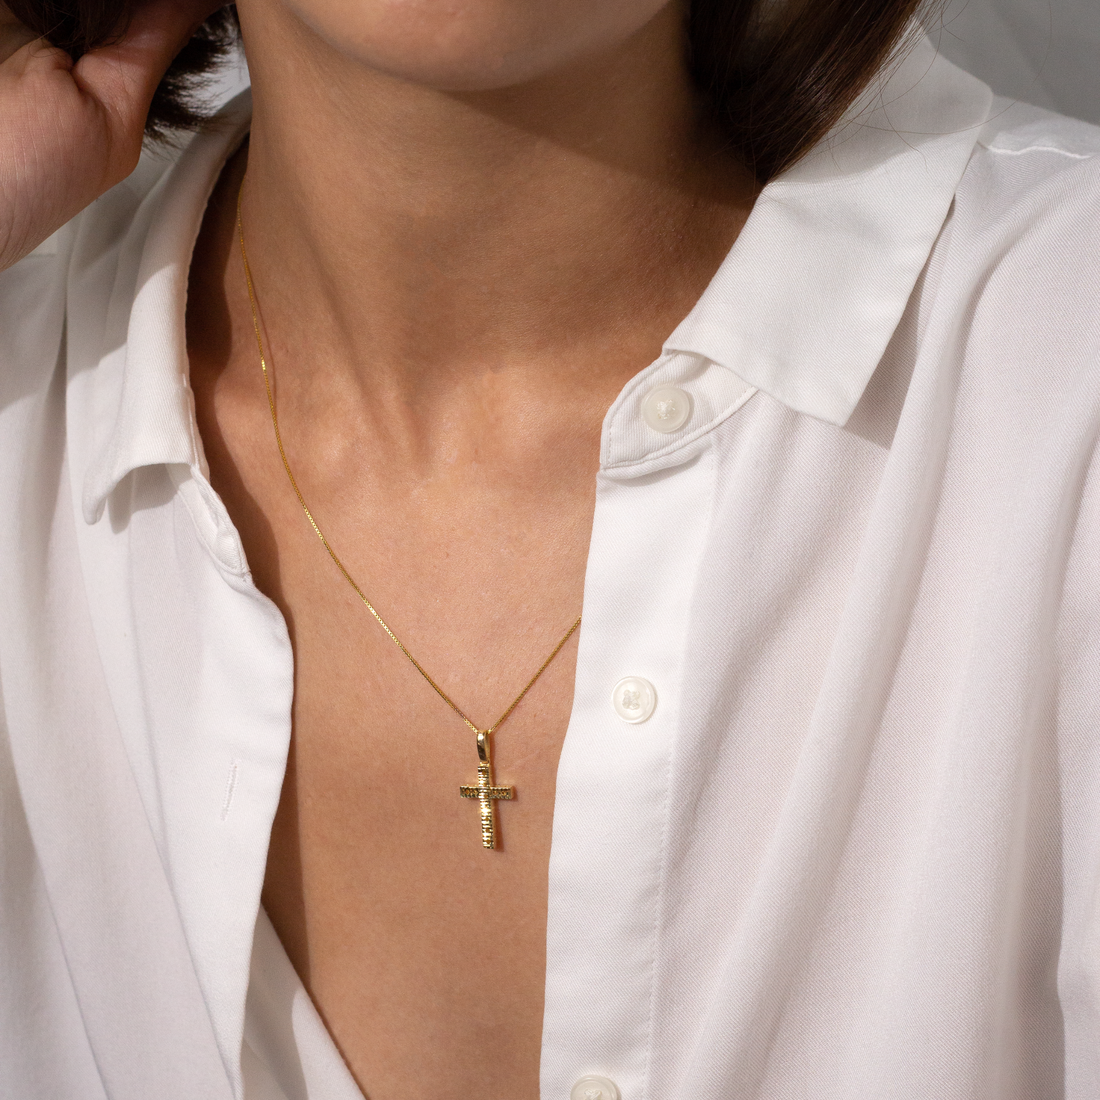 gold cross necklace canada, gold cross necklace toronto